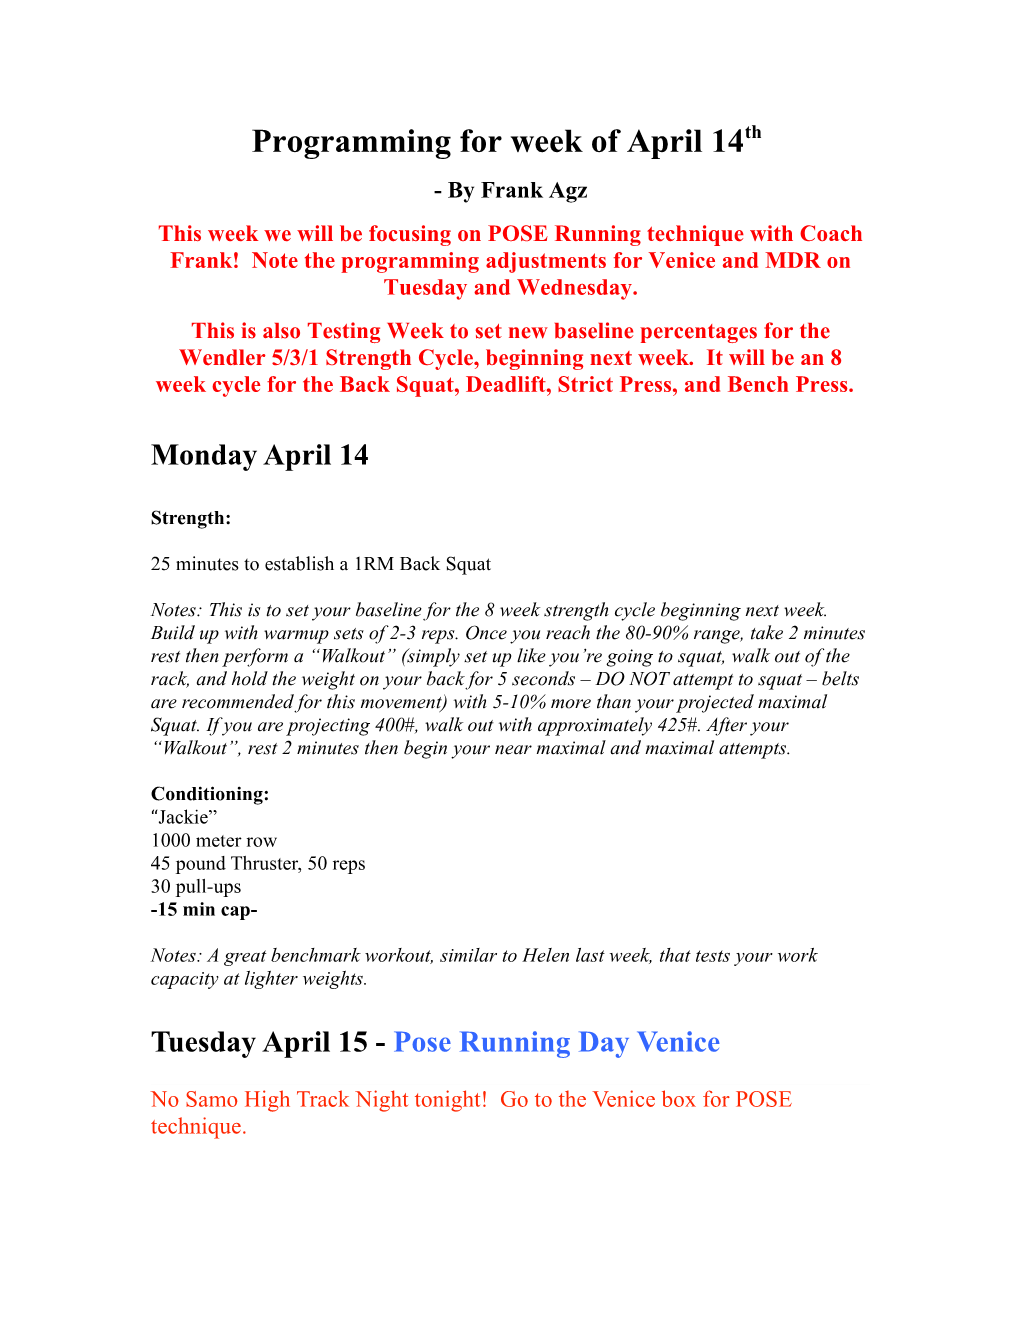 Programming for Week of April 14Th - by Frank Agz